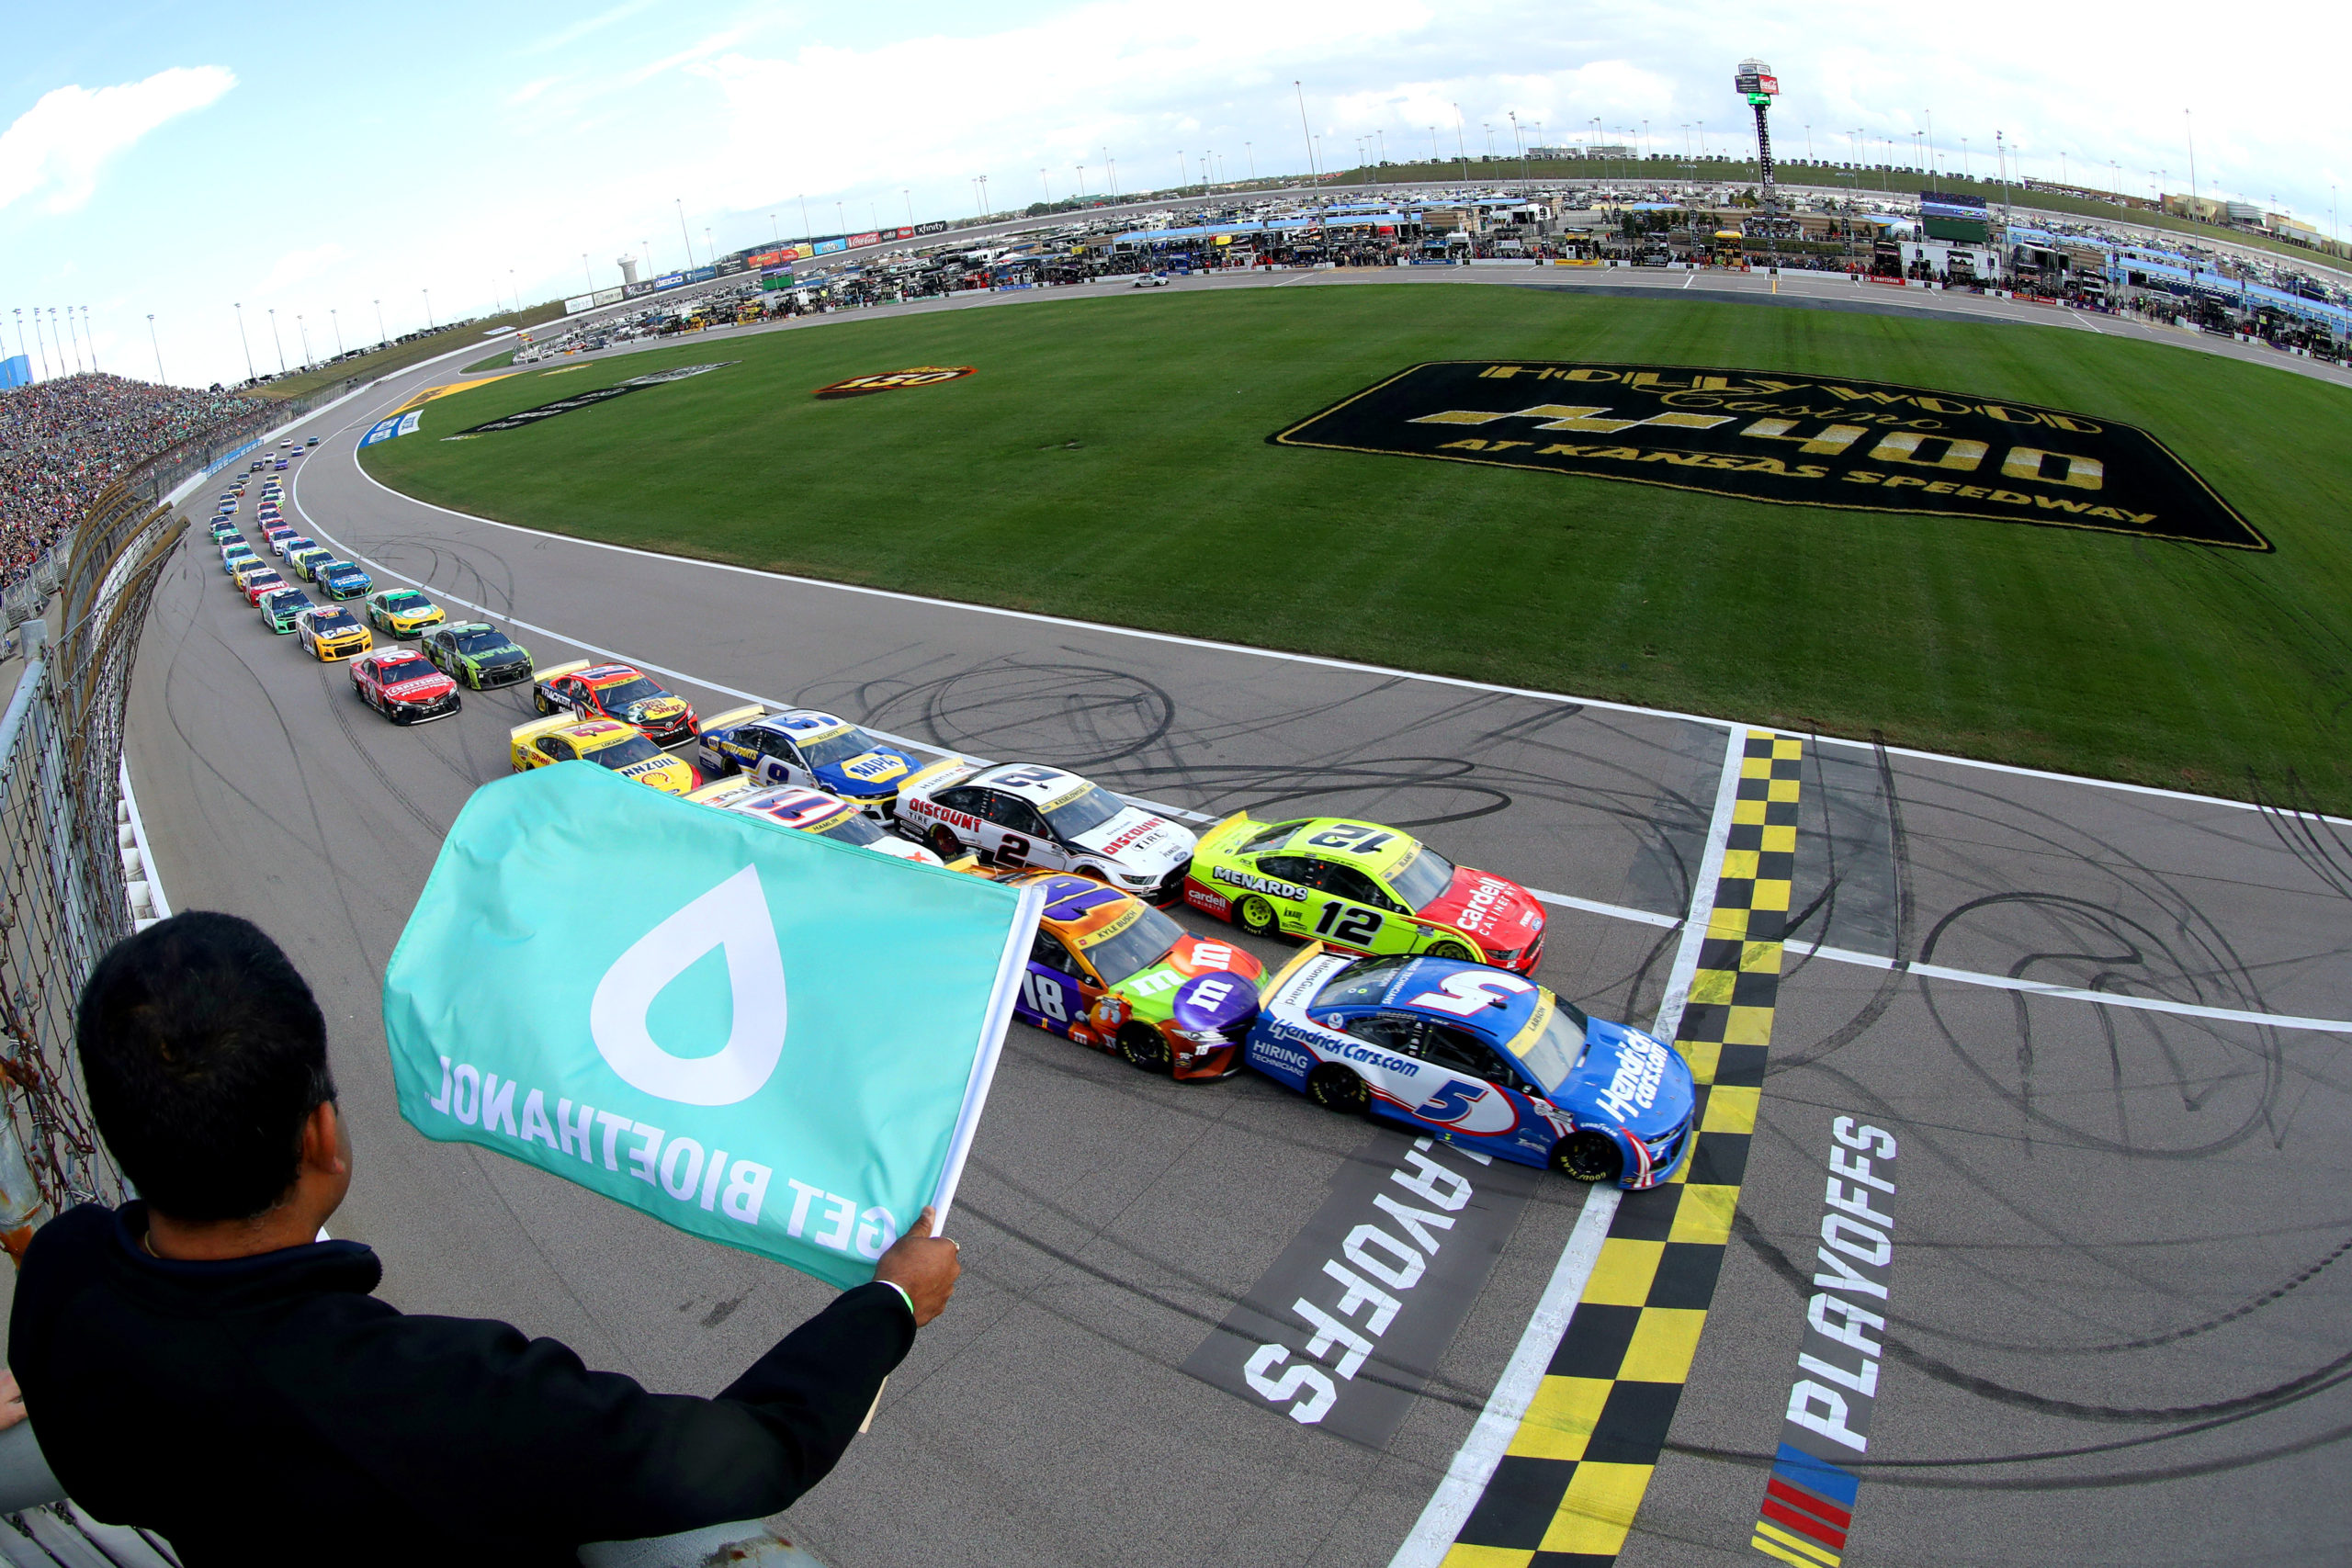 Who Could Claim Victory at Kansas Speedway?